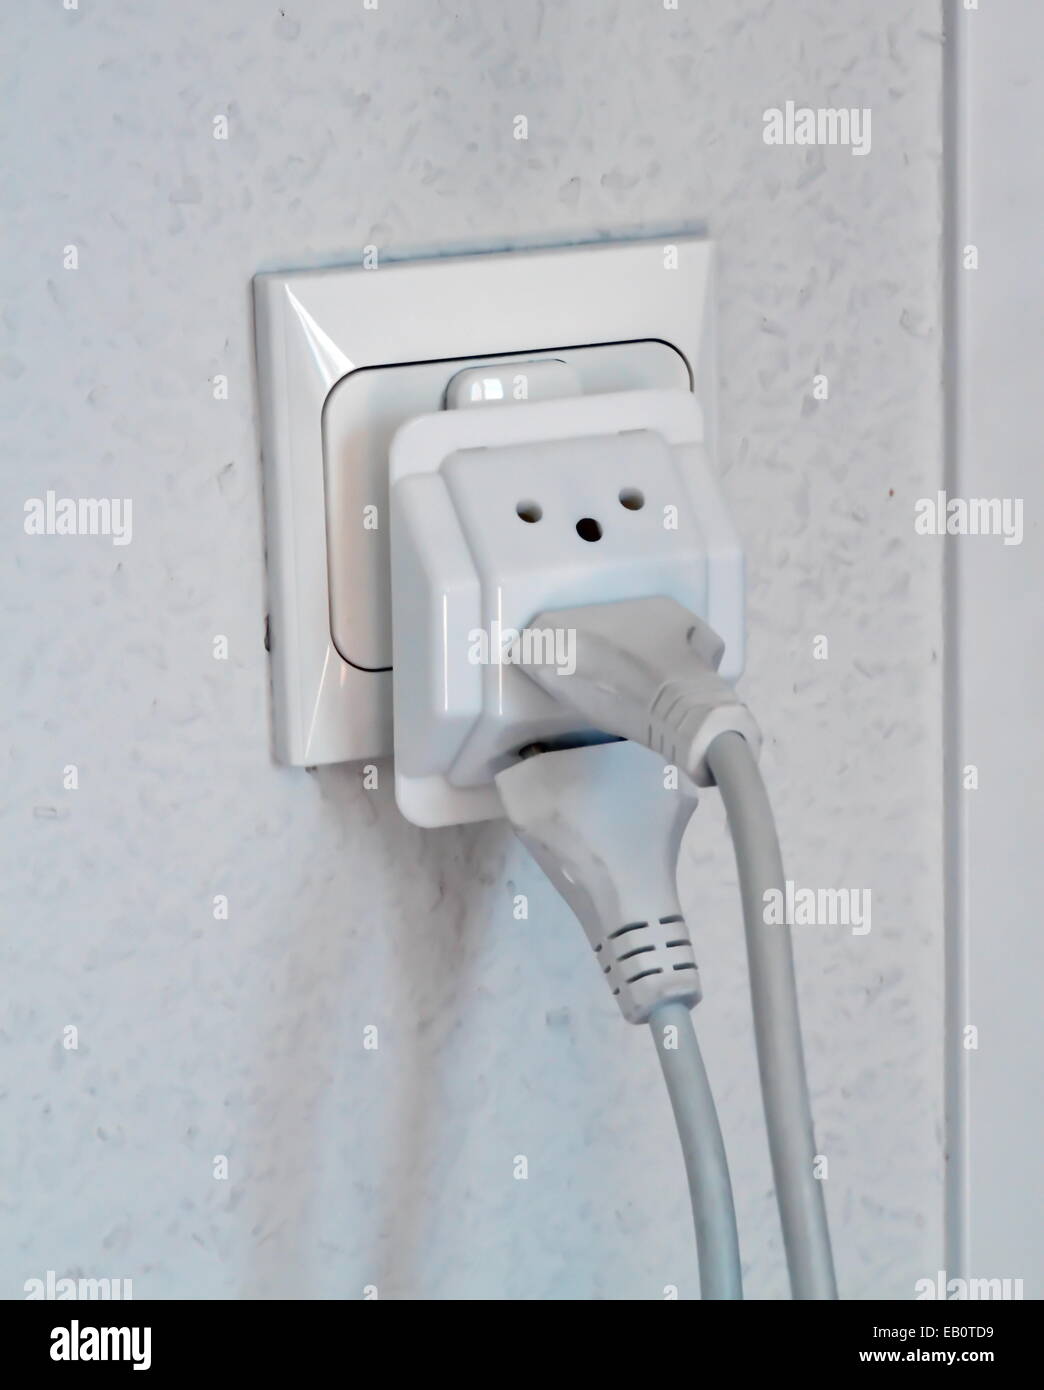 Multiple electrical plugs in wall outlet, Switzerland, Europe Stock Photo